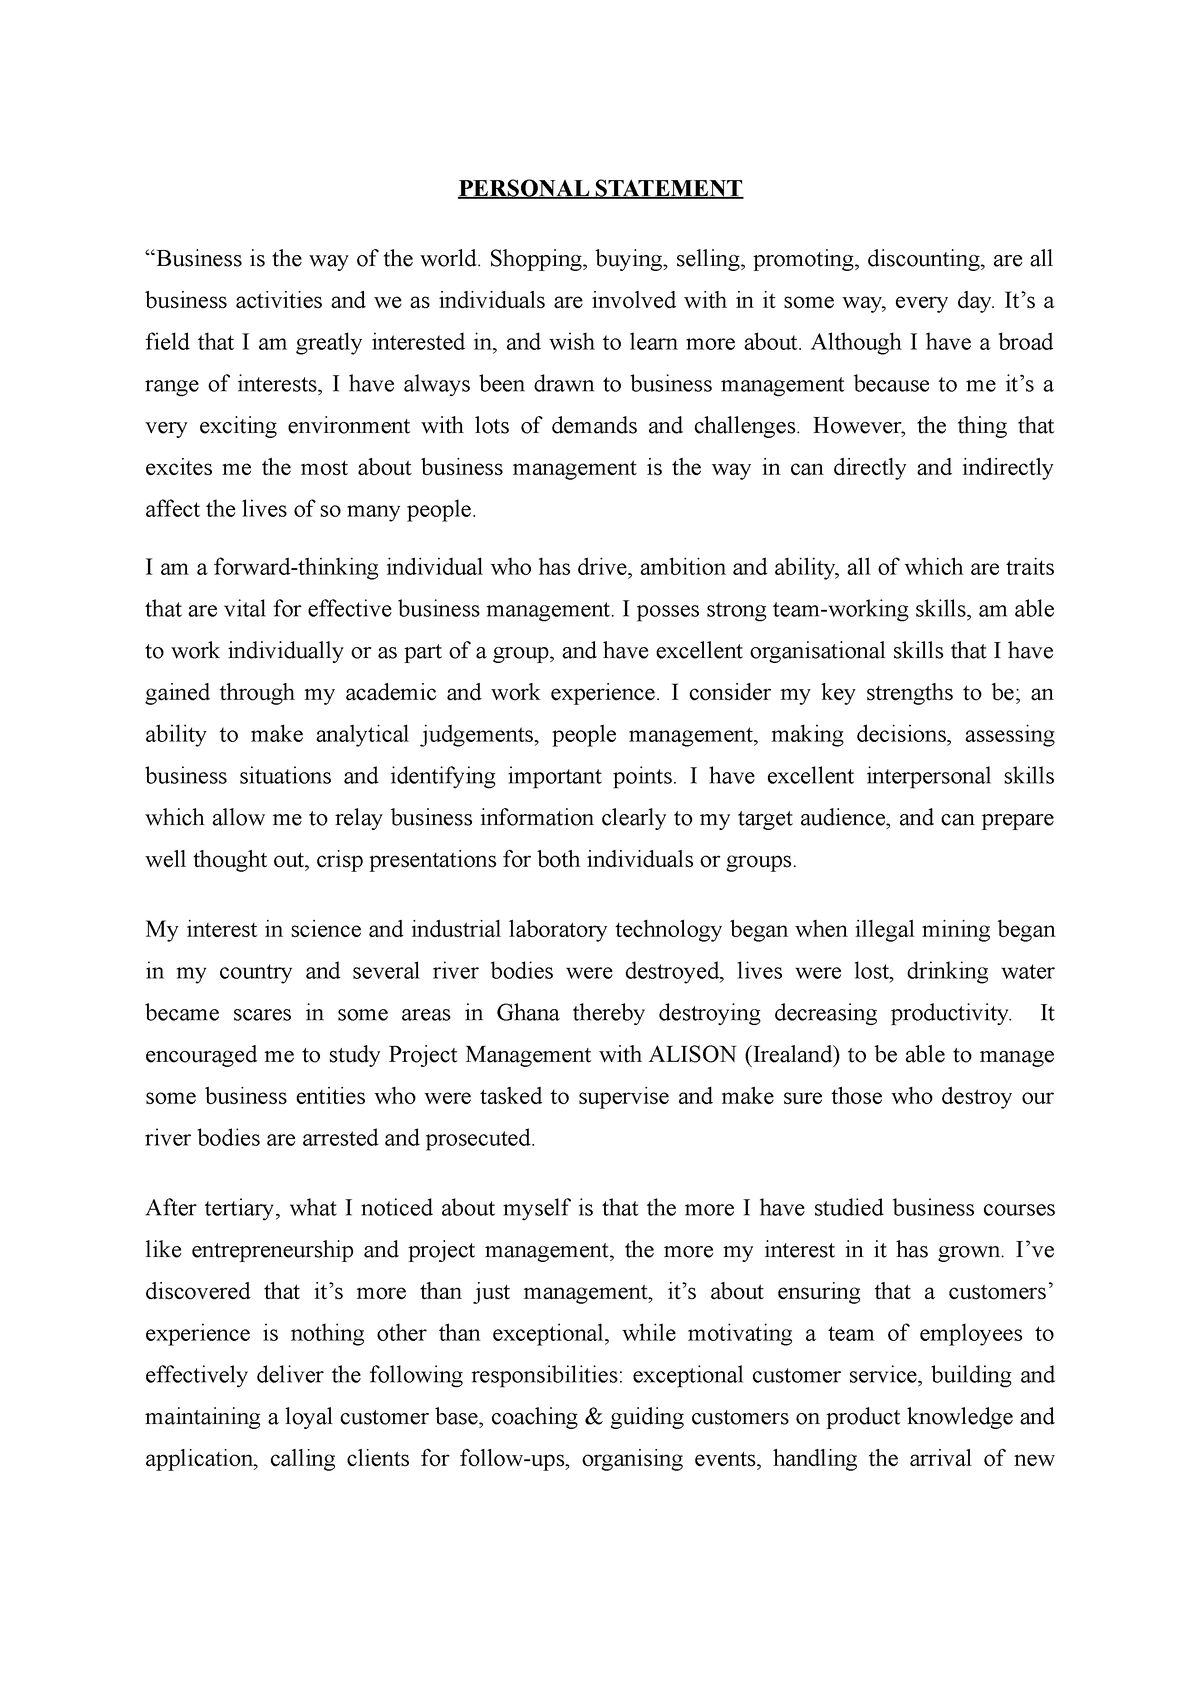 global business management personal statement